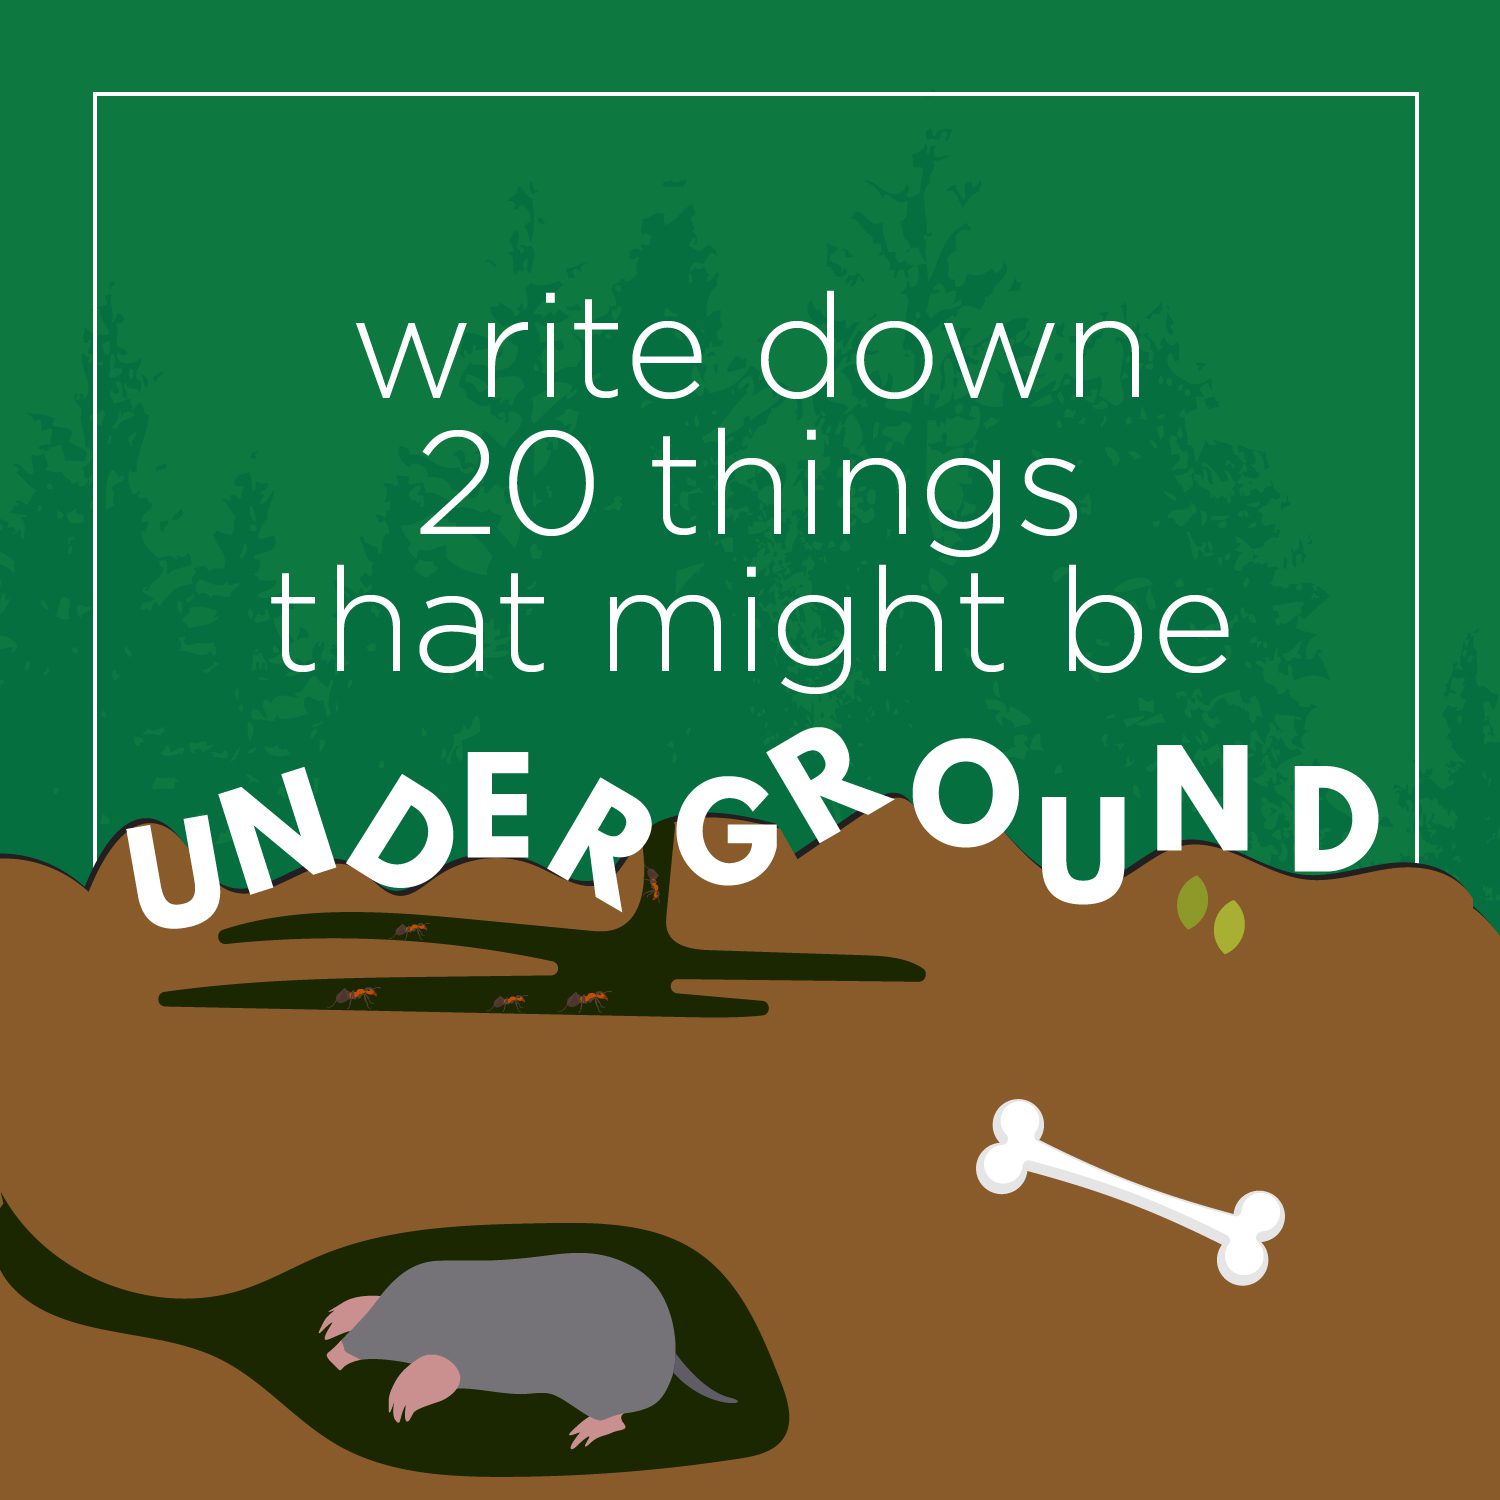 Write down 20 things that might be underground